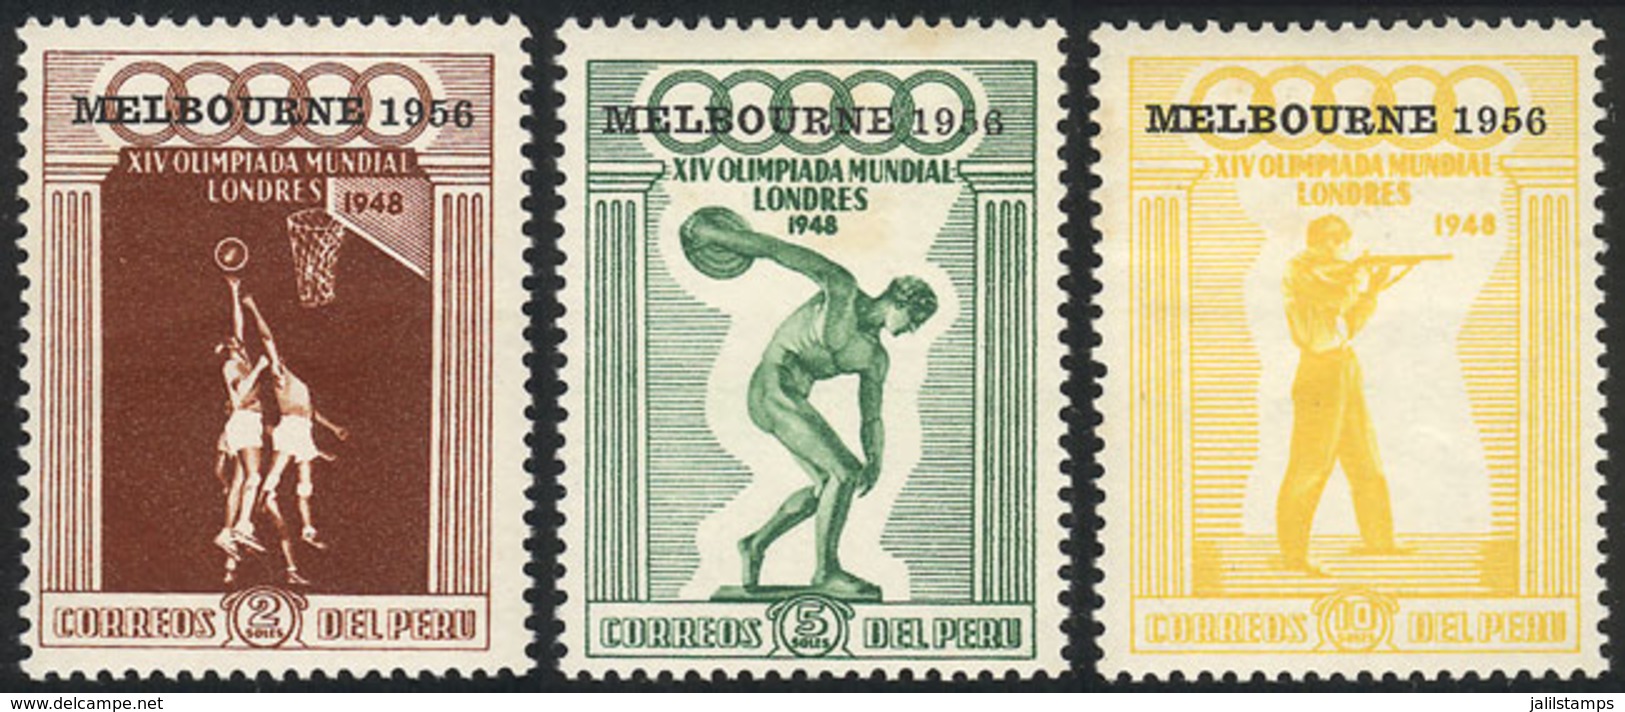 PERU: Yvert 117/119, 1956 Melbourne Olympic Games, The 3 Stamps With Red Overprint "AEREO" OMITTED, Very Rare, Mint But  - Perú